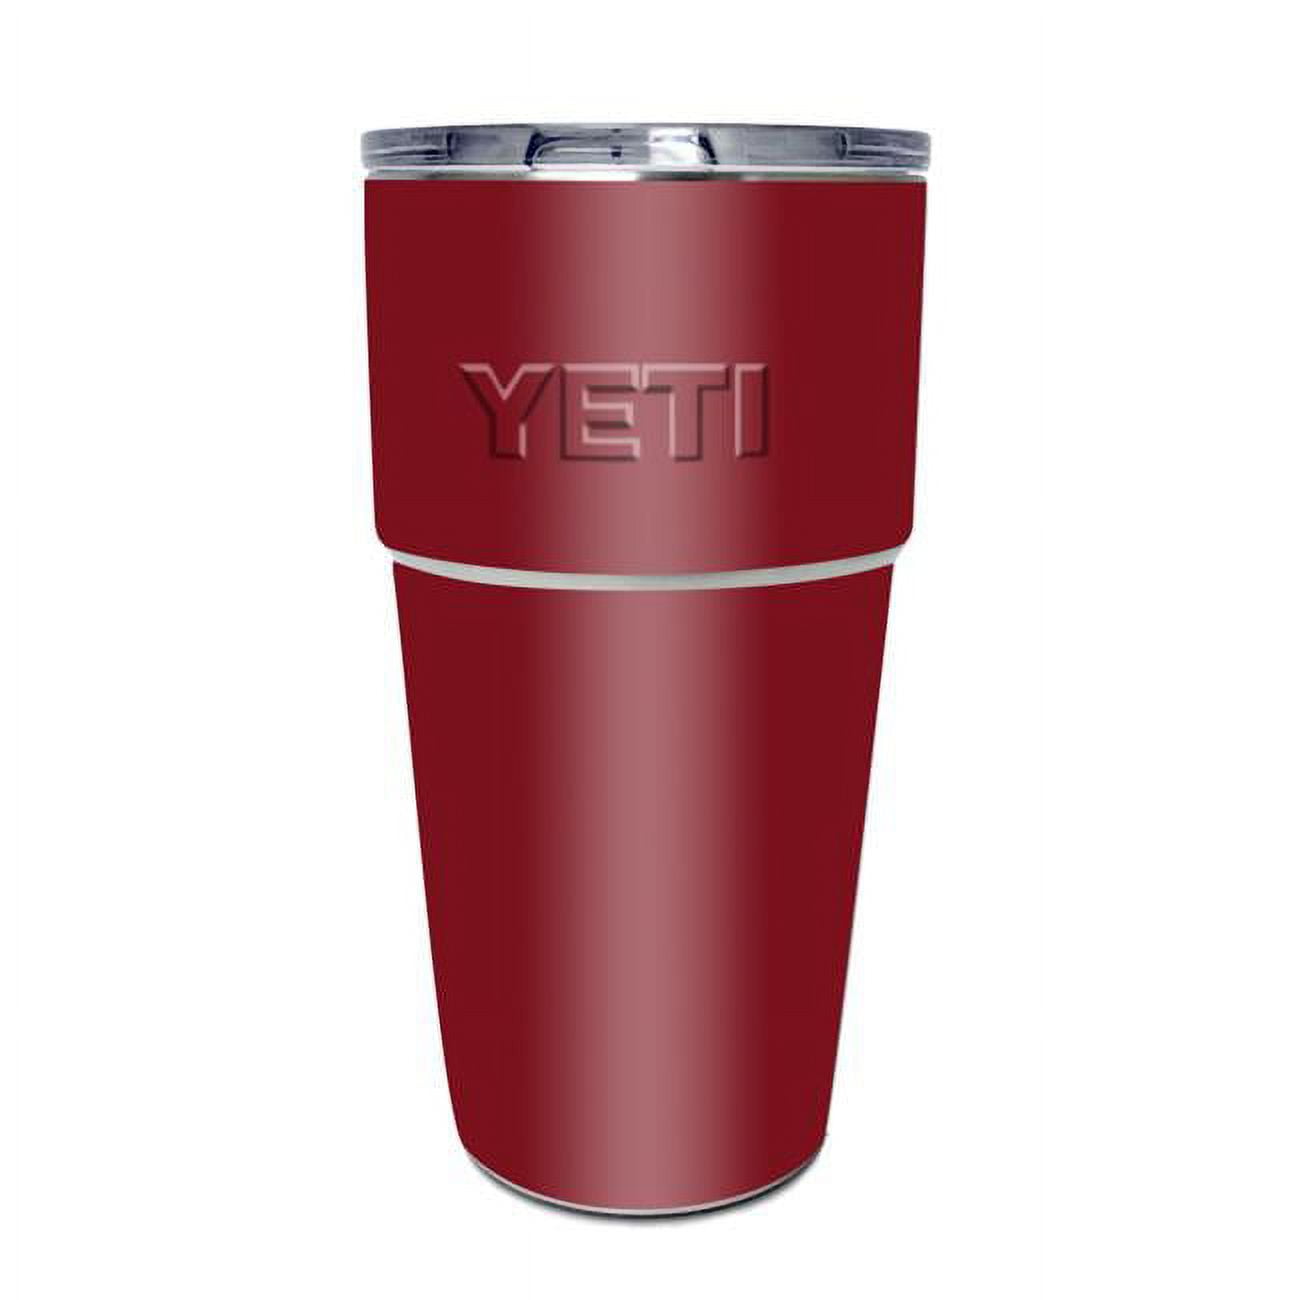 Skin for Yeti Rambler 20 oz Tumbler - Solid State Black by Solid Colors